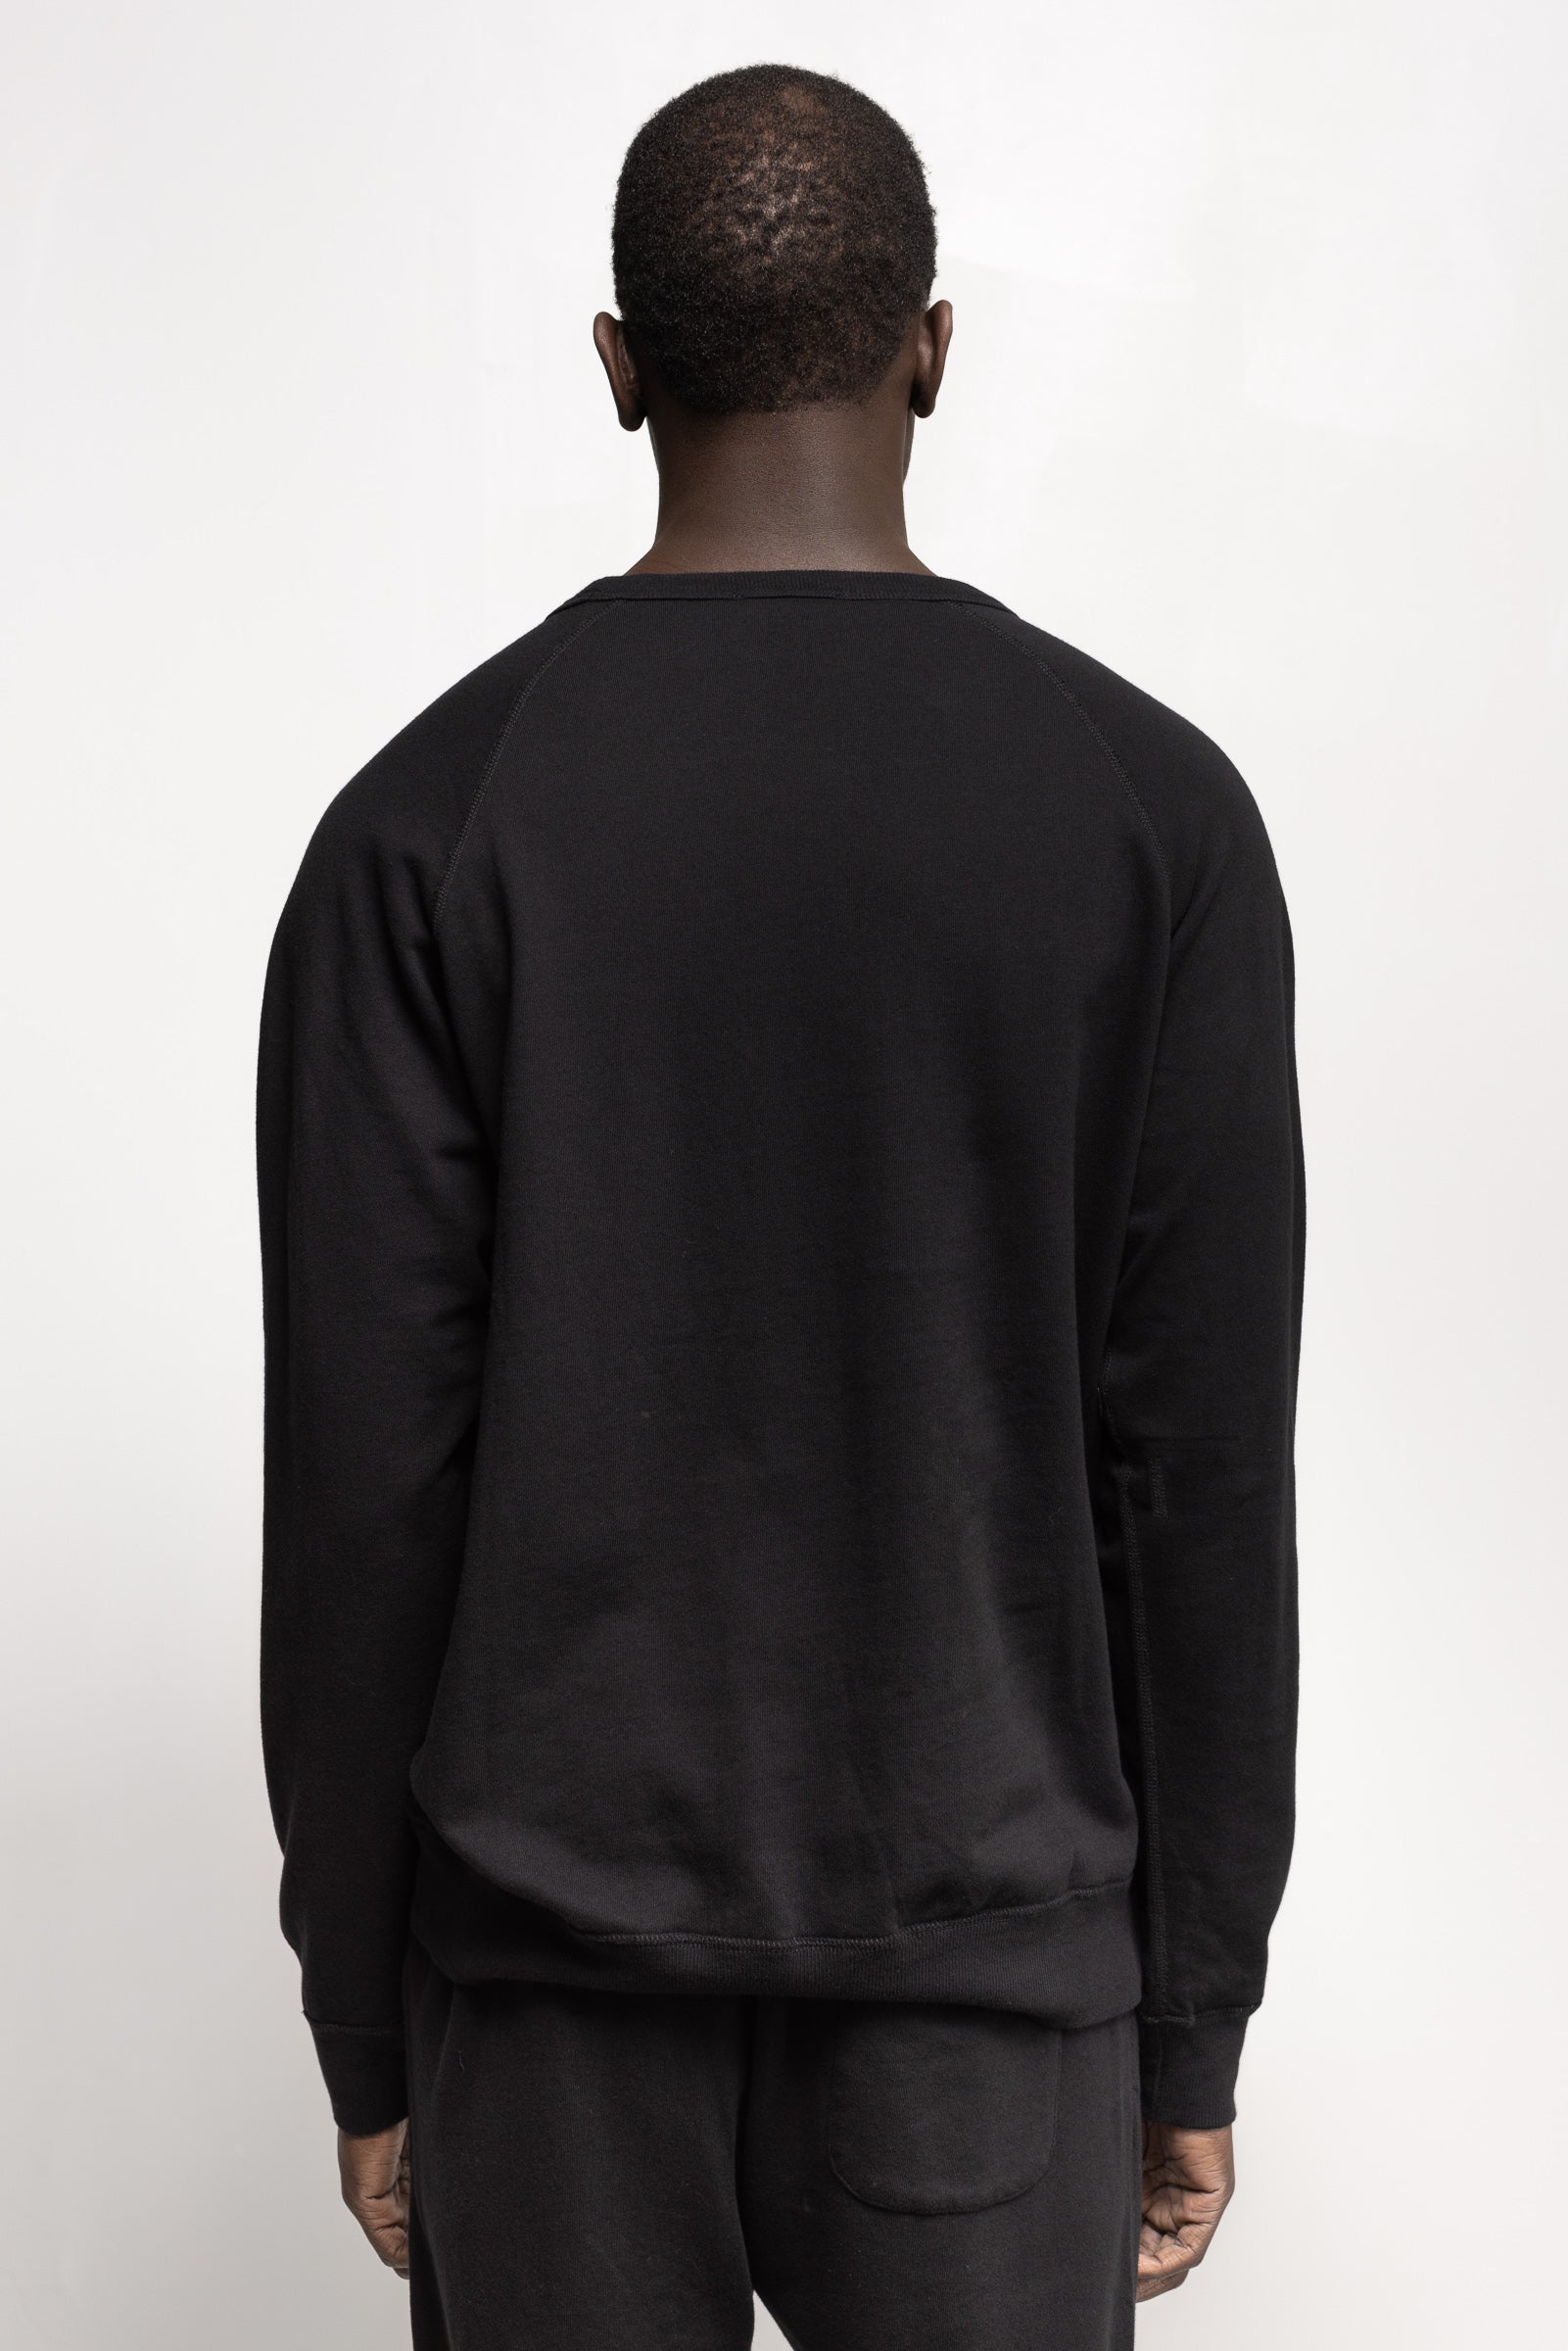 French Terry Long Sleeve Crew in Black 04